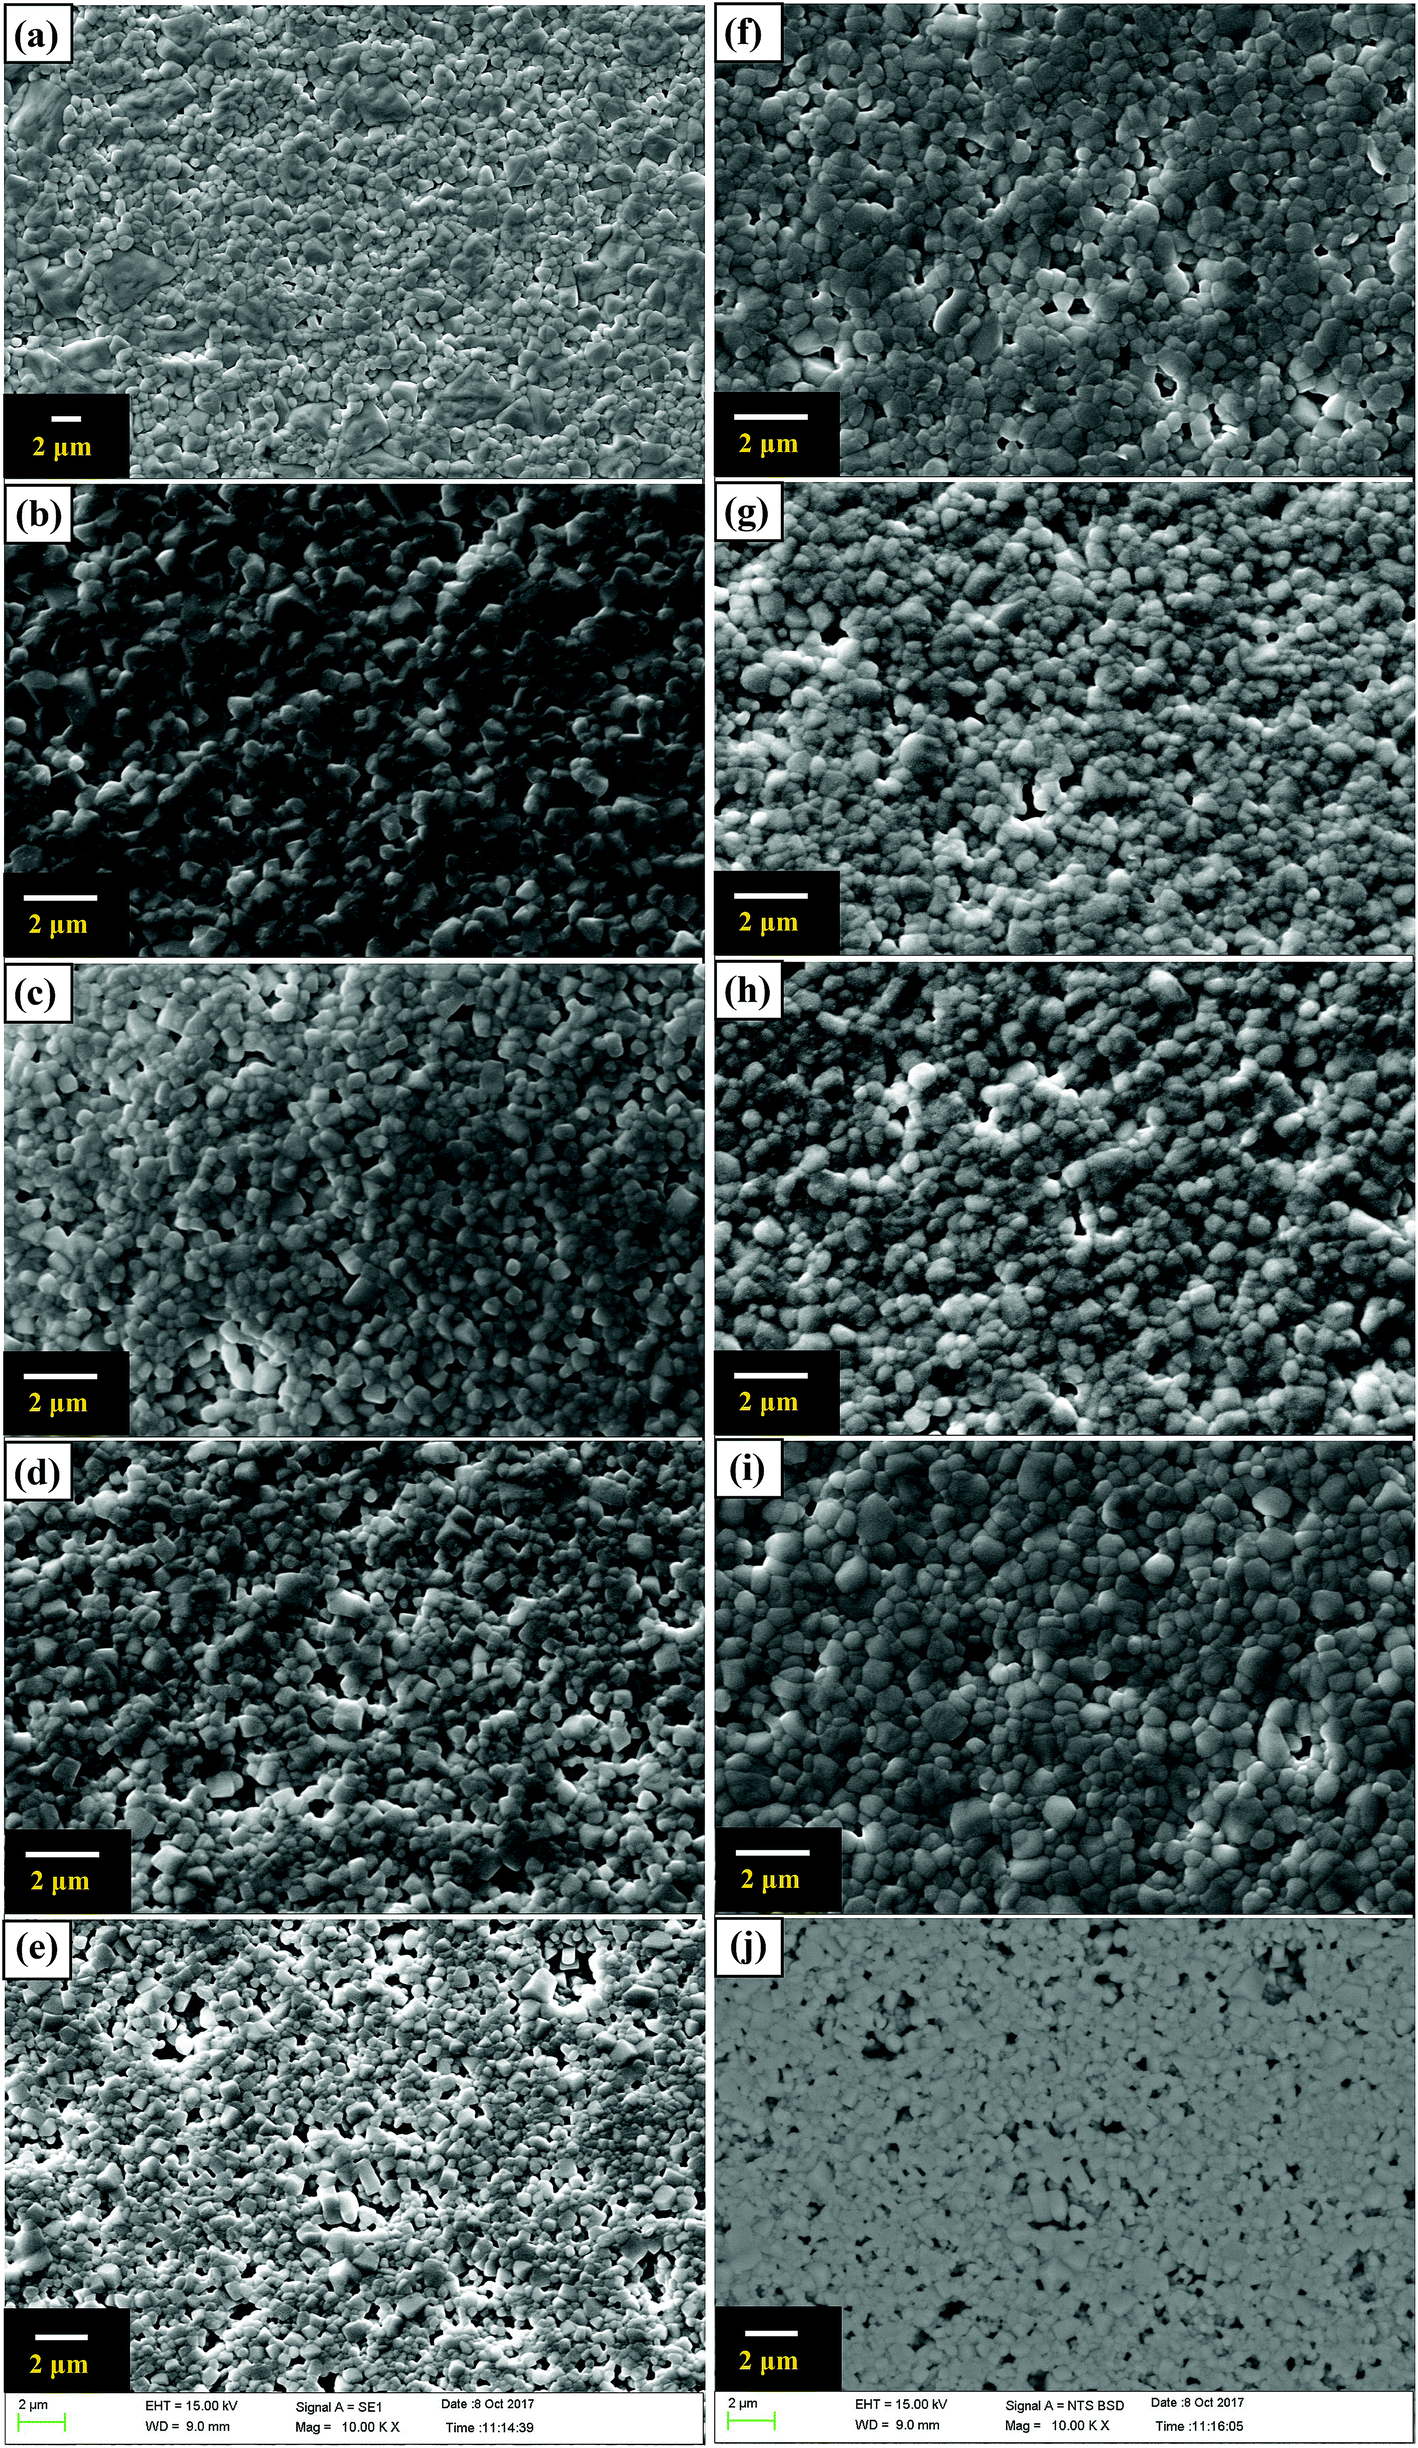 Dielectric And Photoluminescence Properties Of Fine Grained Batio 3 Ceramics Co Doped With Amphoteric Sm And Valence Variable Cr Rsc Advances Rsc Publishing Doi 10 1039 C8raa